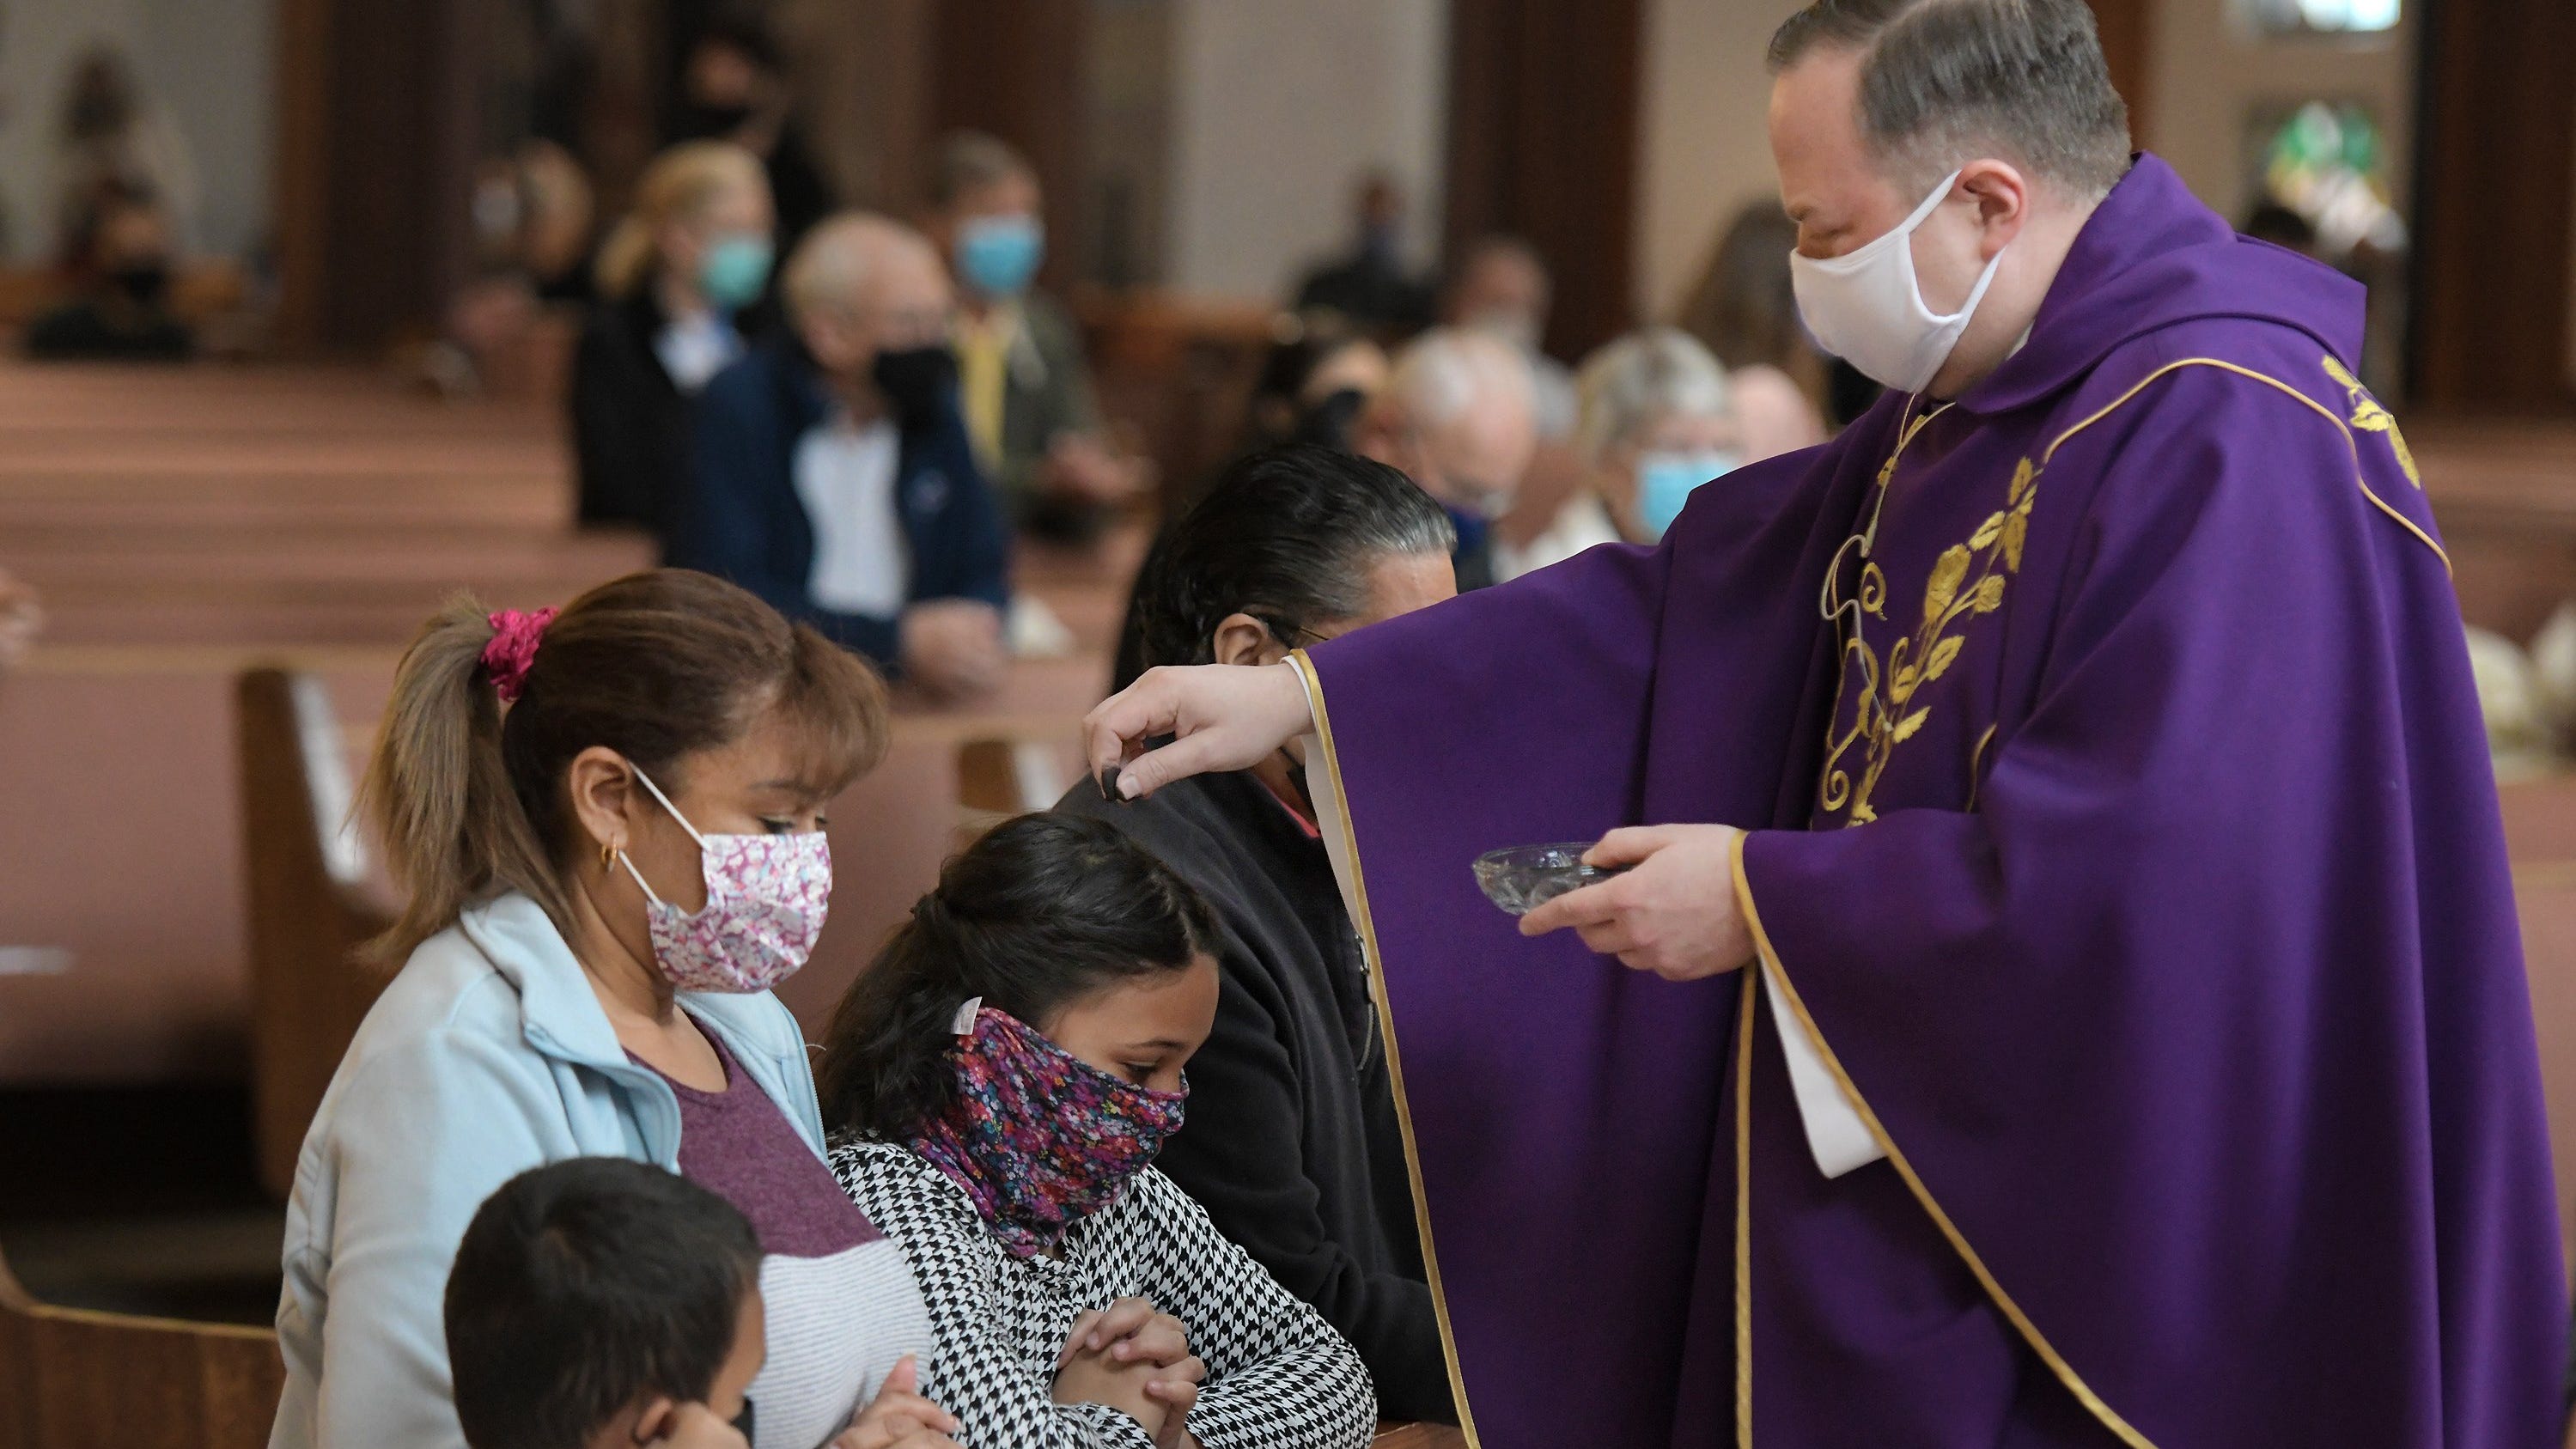 Amid COVID pandemic, changes made for Ash Wednesday in Jacksonville